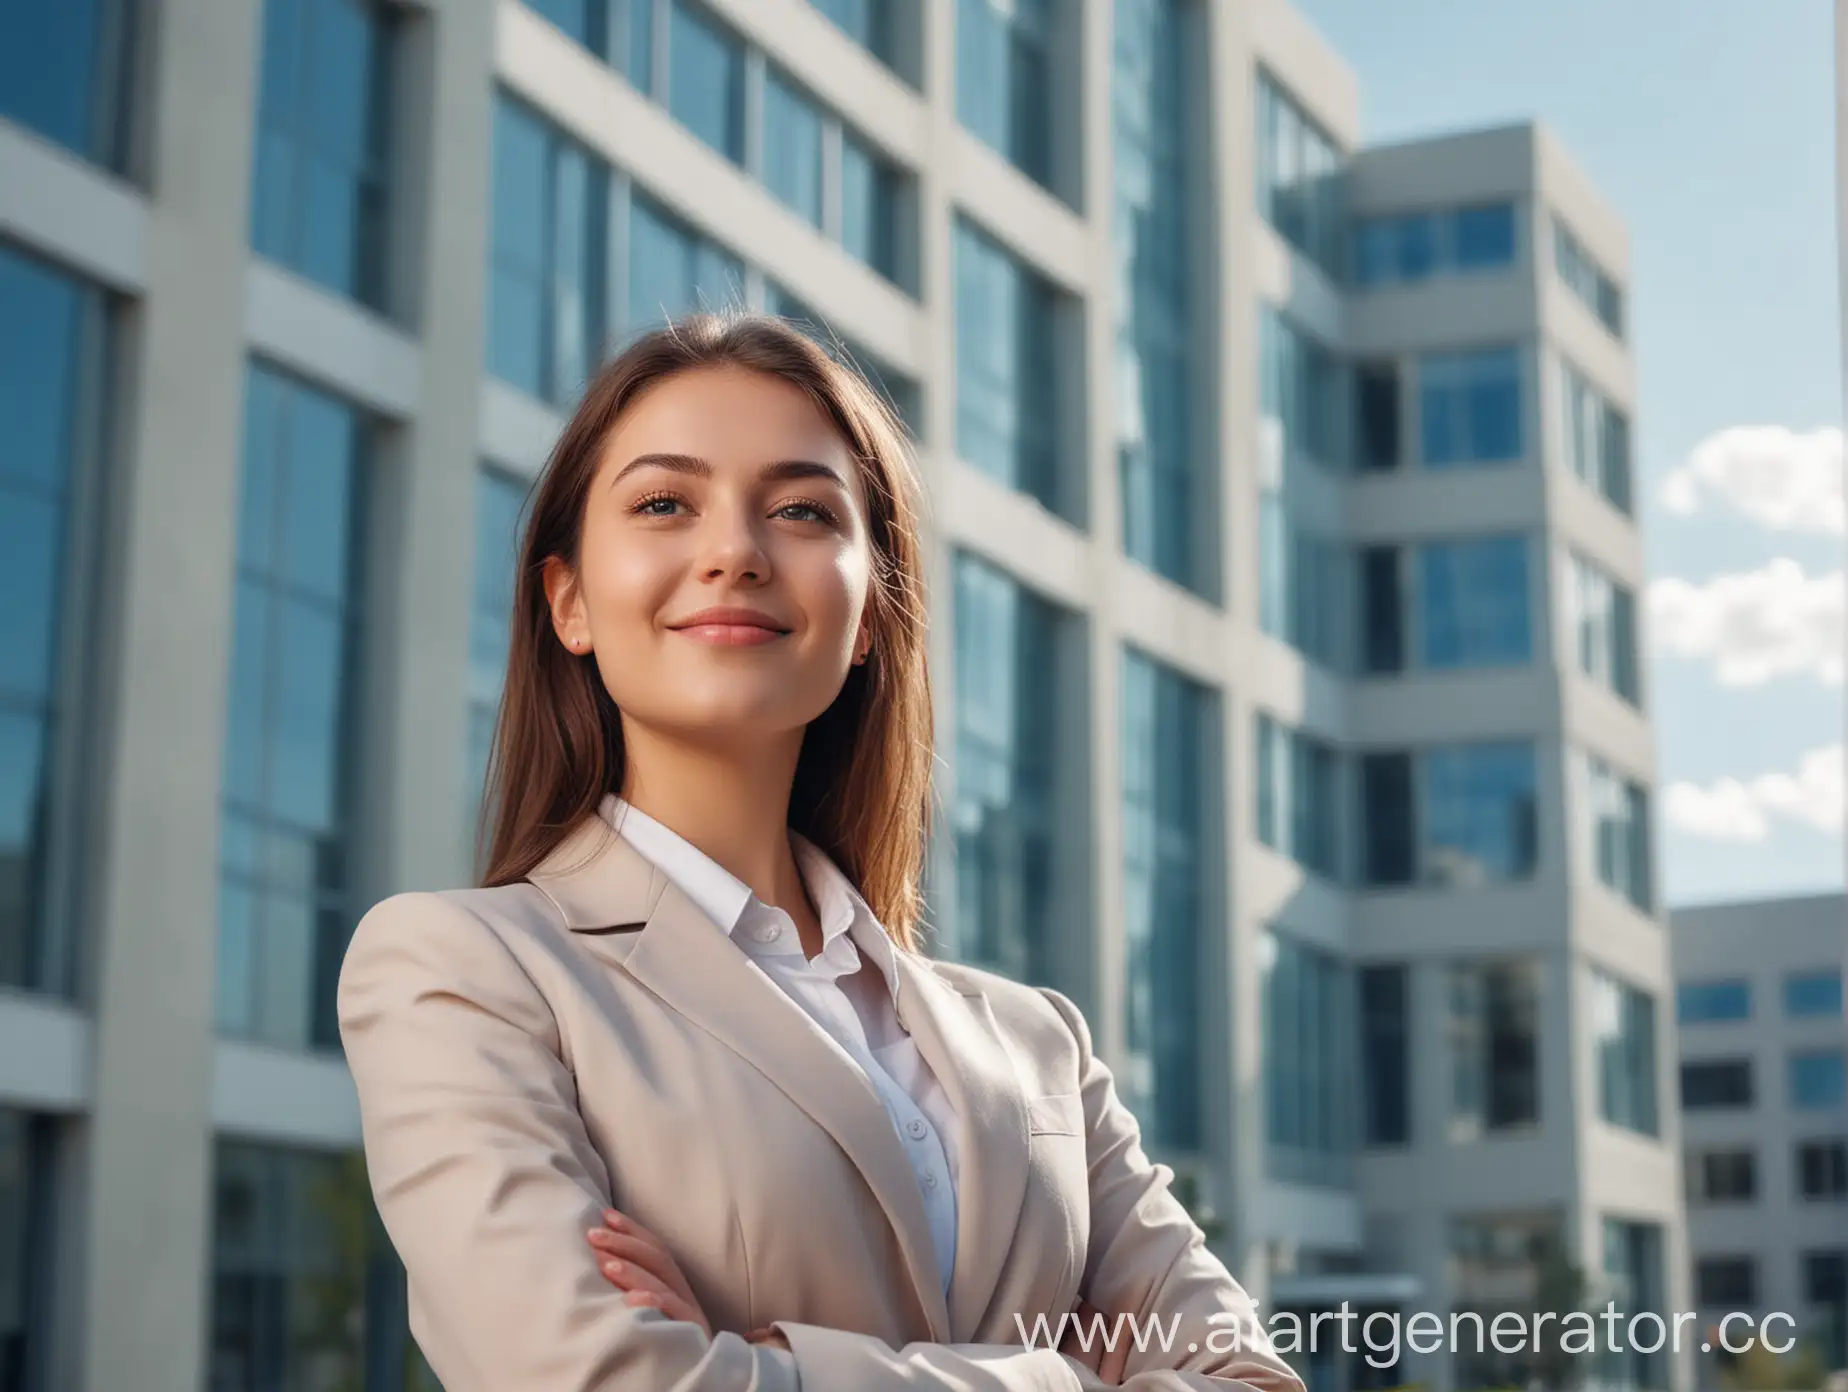 A beautiful girl in a business suit, with a pleasant smiling face, her gaze fixed on the sky, stands against the backdrop of a business office on a sunny day